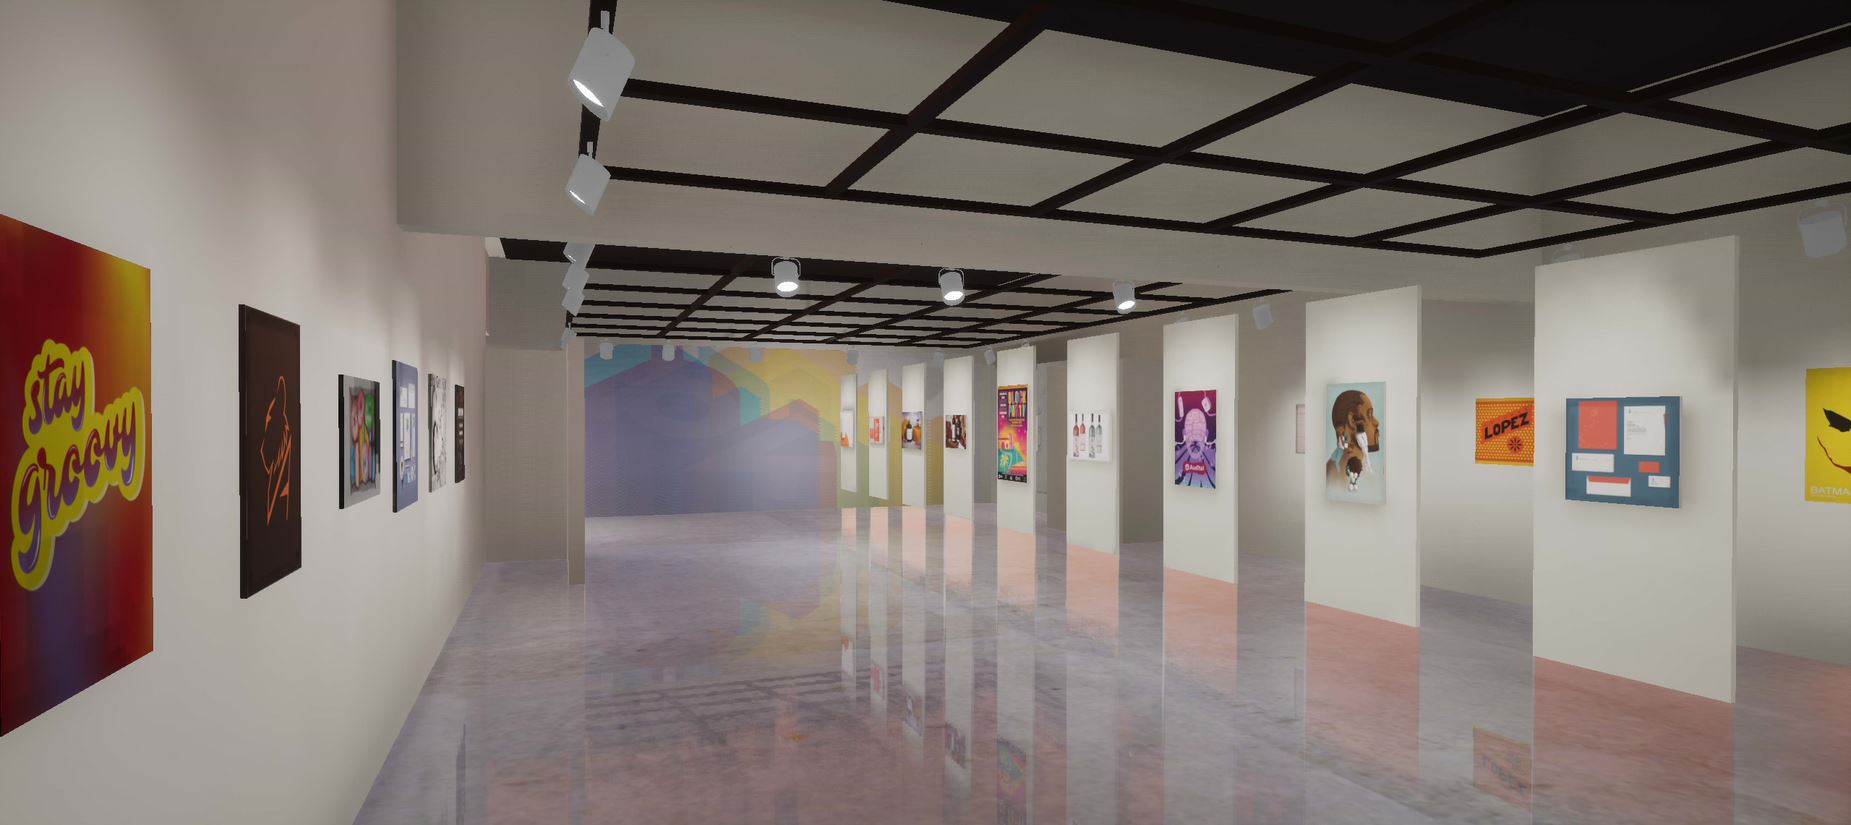 Installation View, Back Gallery, Polykroma 2020 Exhibition, Sept. 1, 2020 to Dec. 1, 2020.